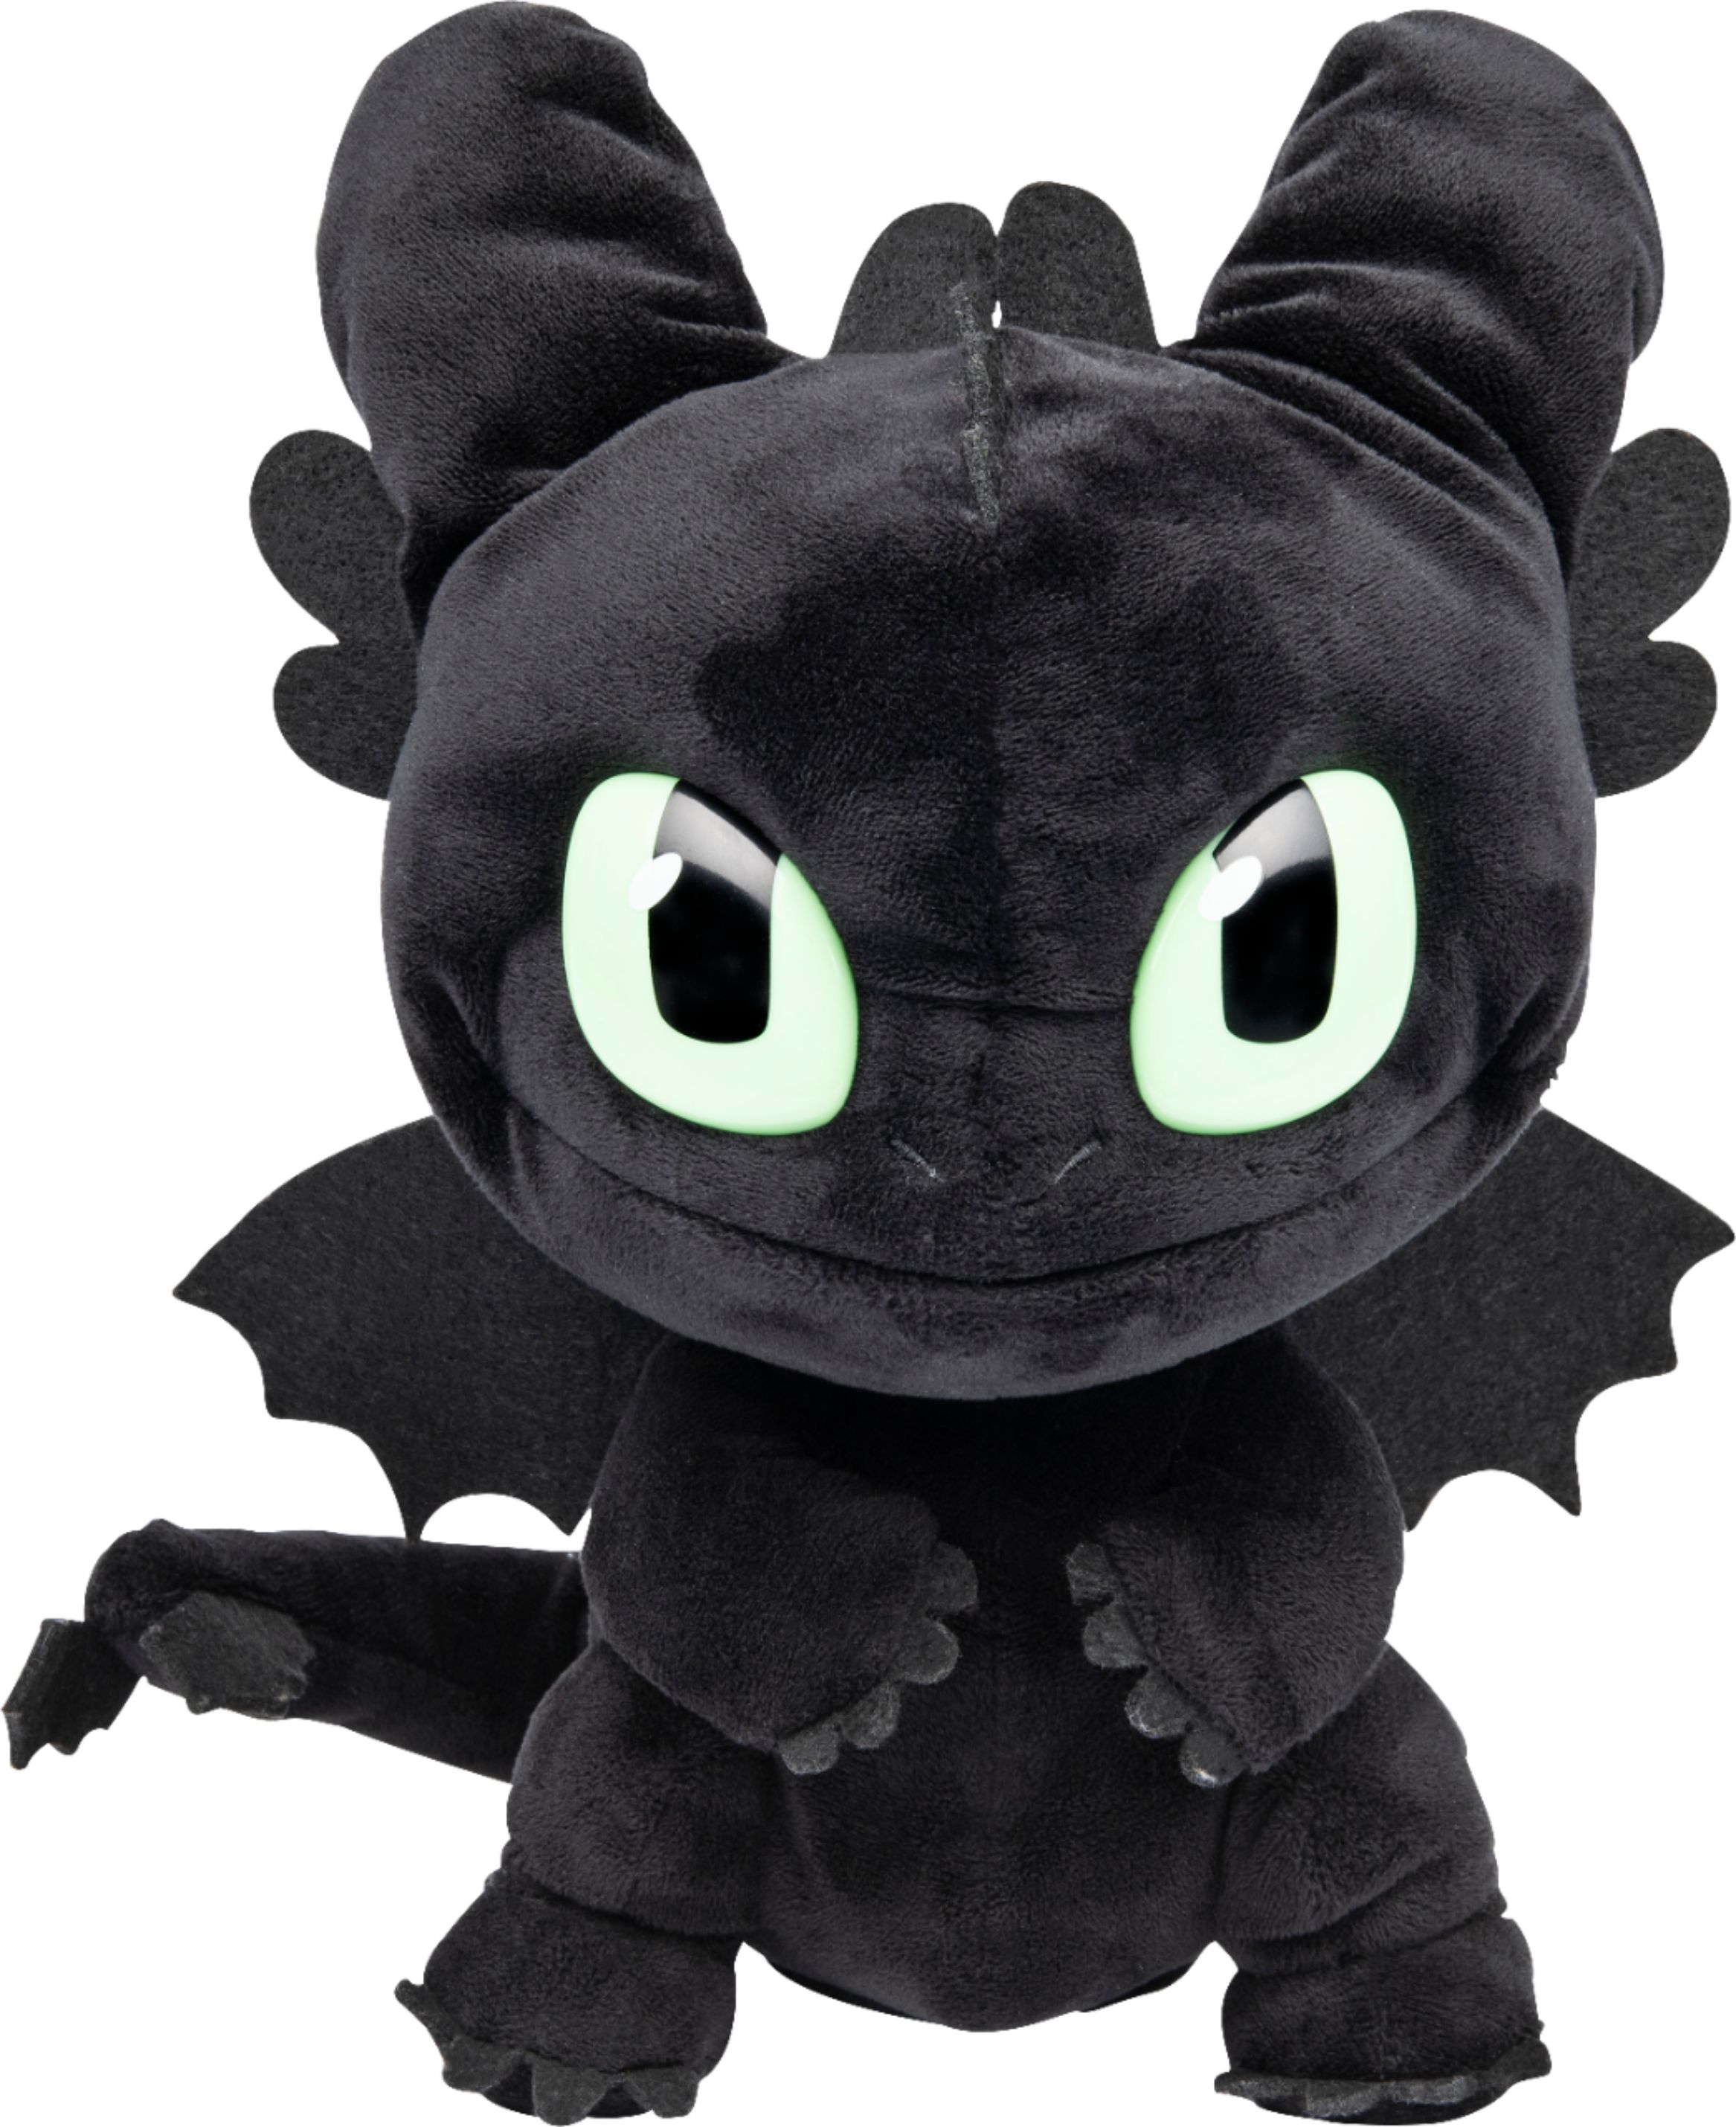 DreamWorks Dragons Toothless Plush Toy 